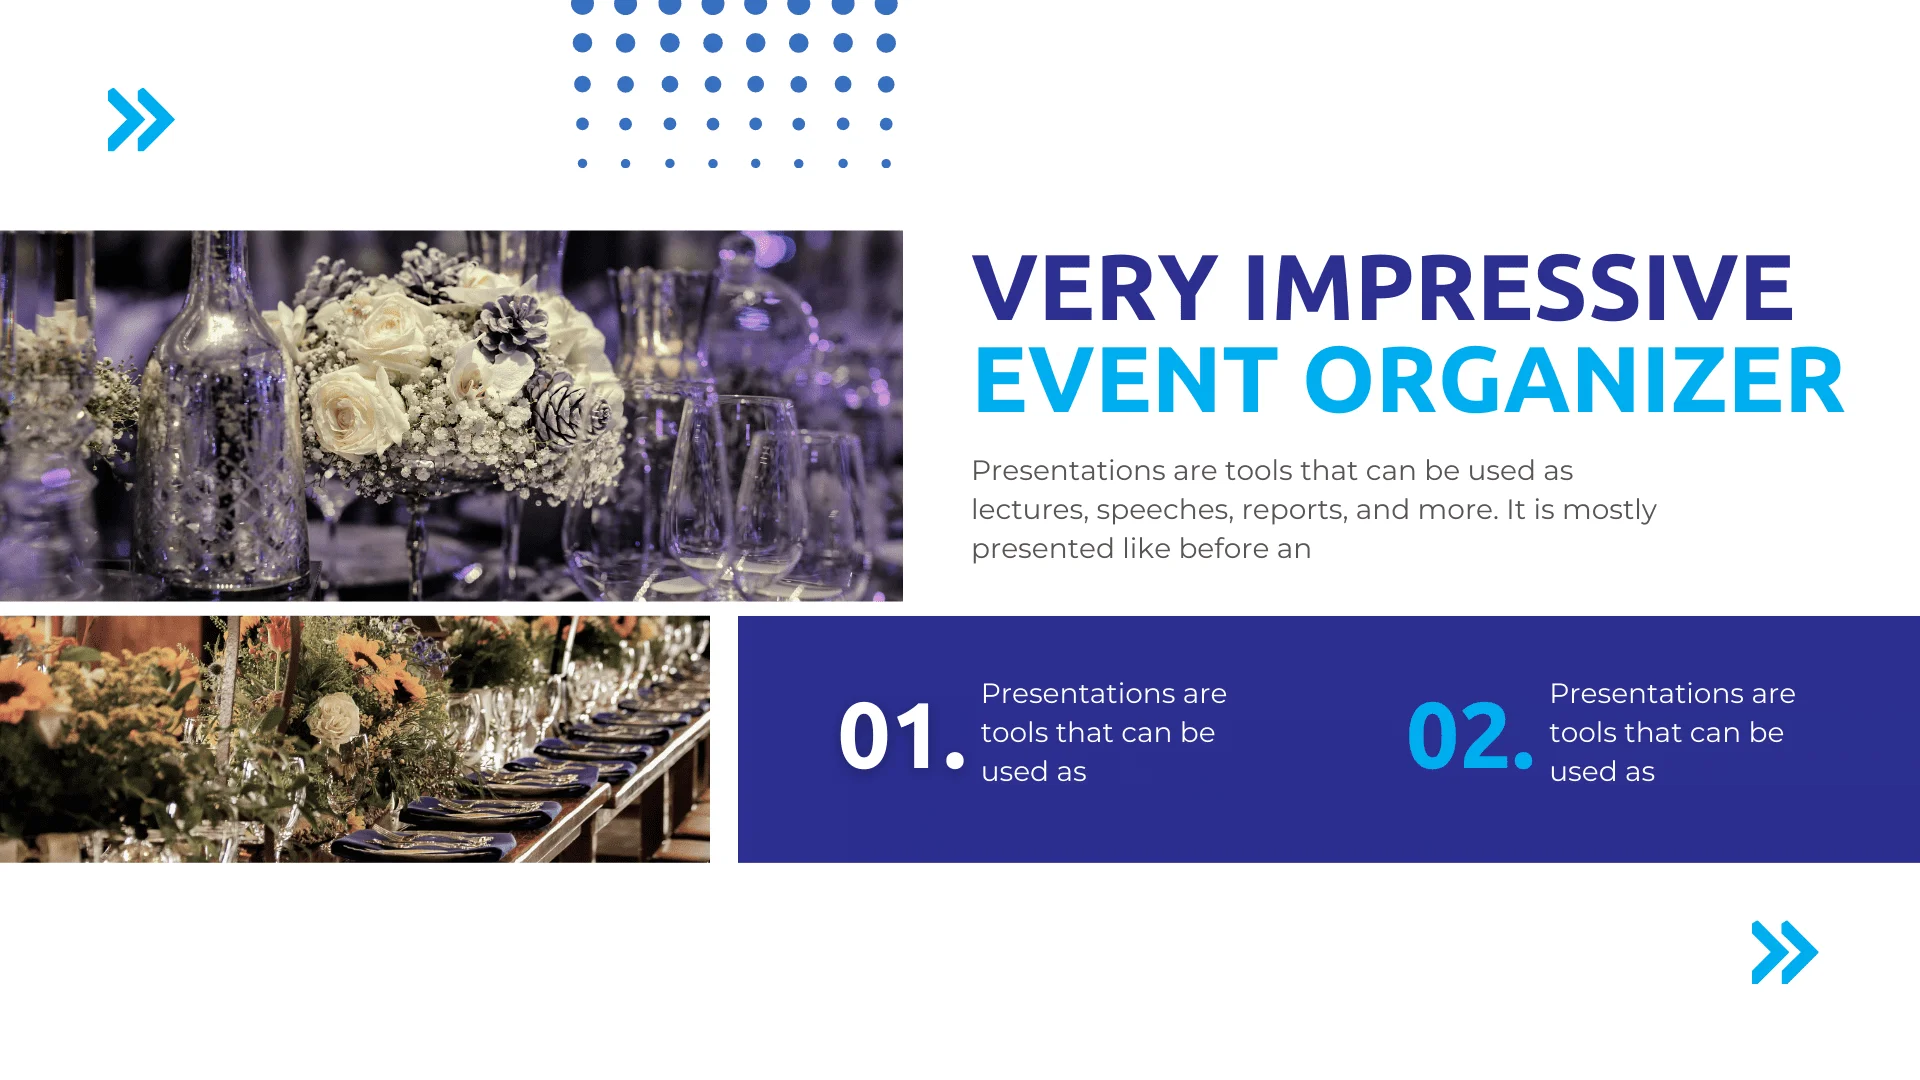 Exceptional 'Image Organizer' presentation templates featuring impressive event-related images.